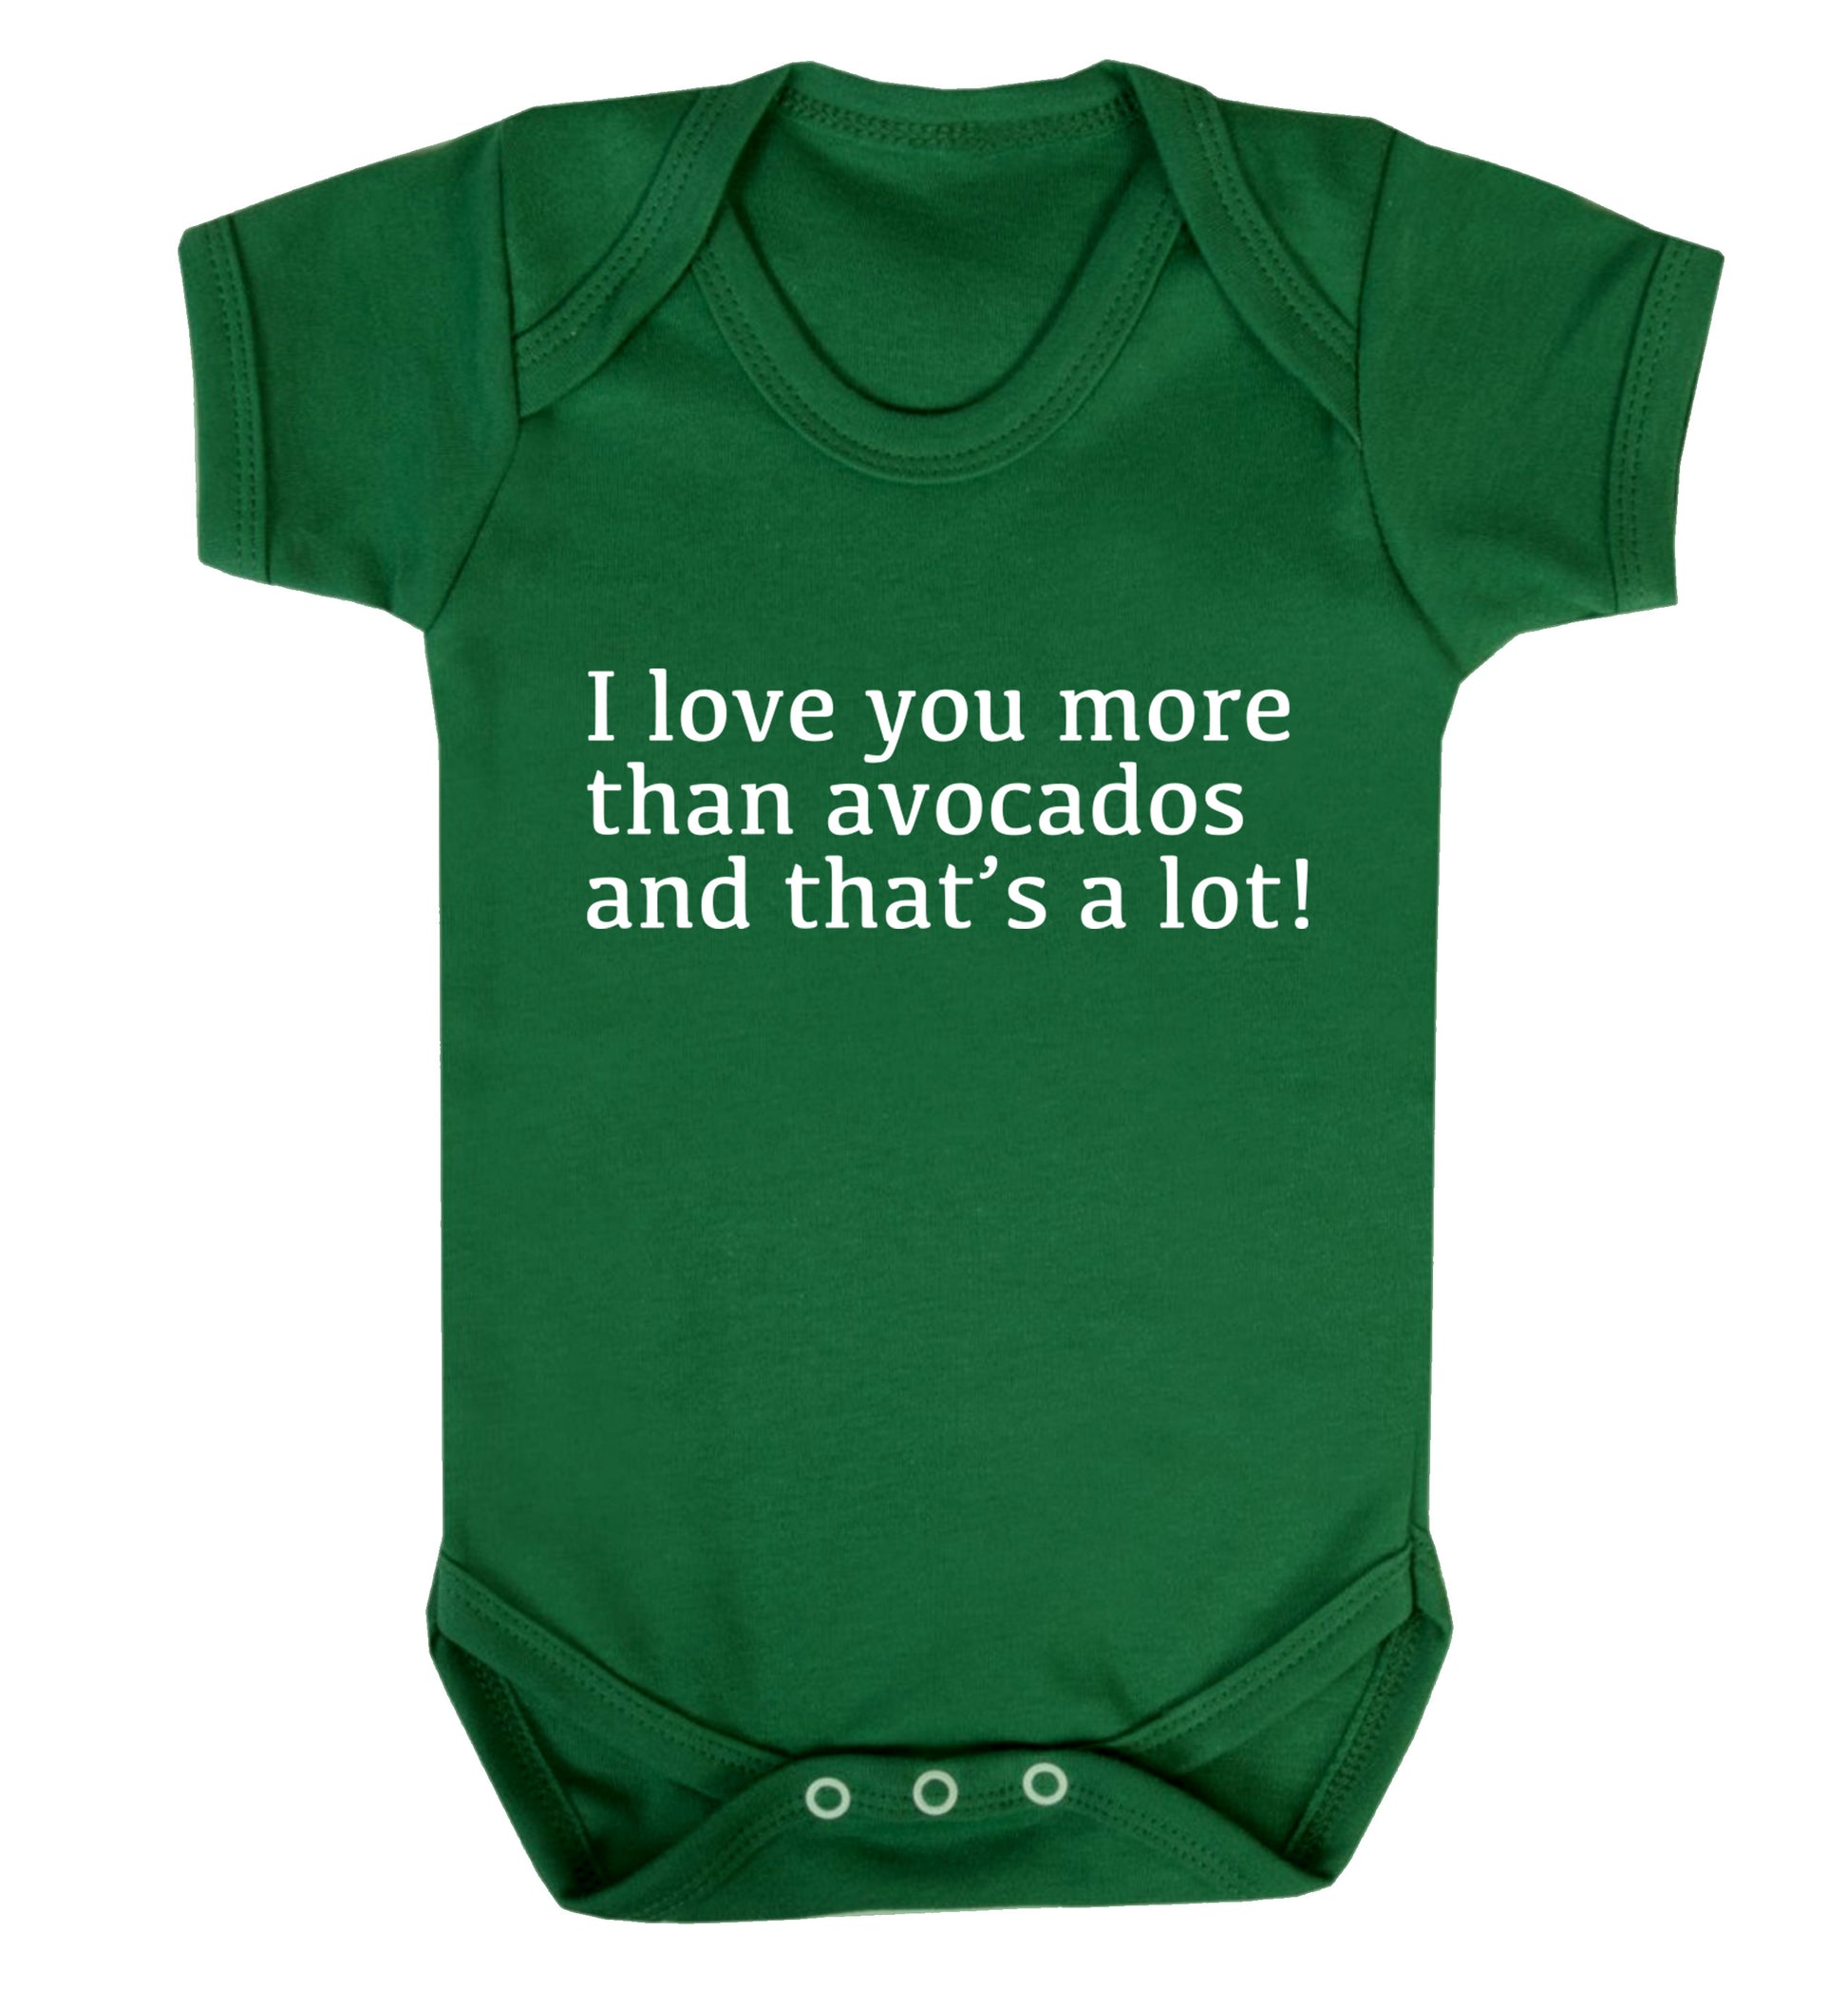 I love you more than avocados and that's a lot Baby Vest green 18-24 months